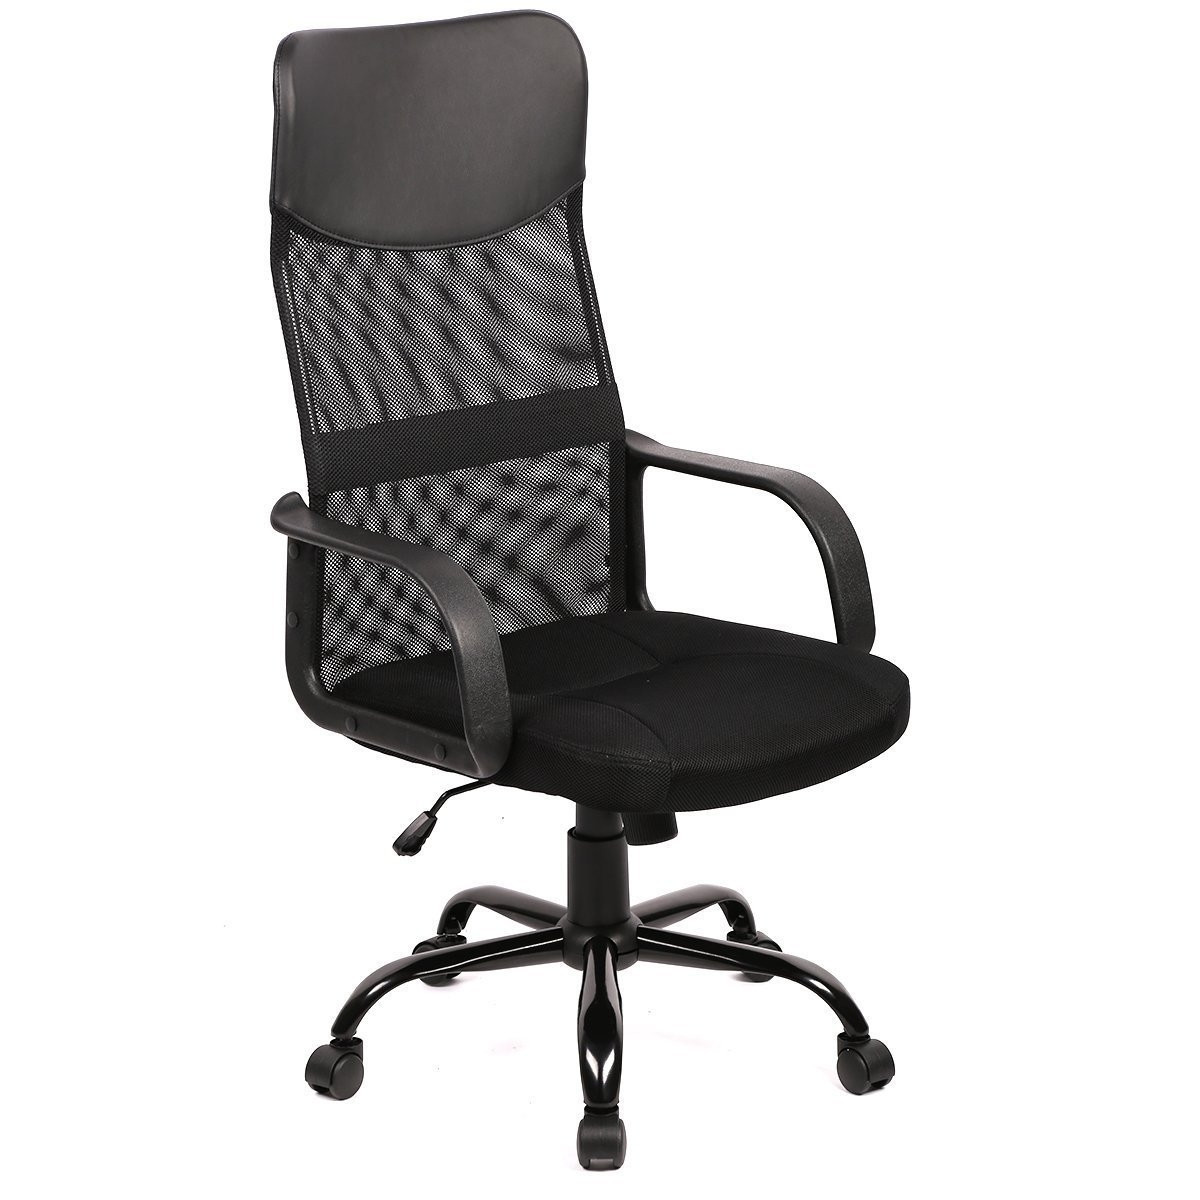 20 Of the Best Ideas for Amazon Computer Chair - Best Collections Ever